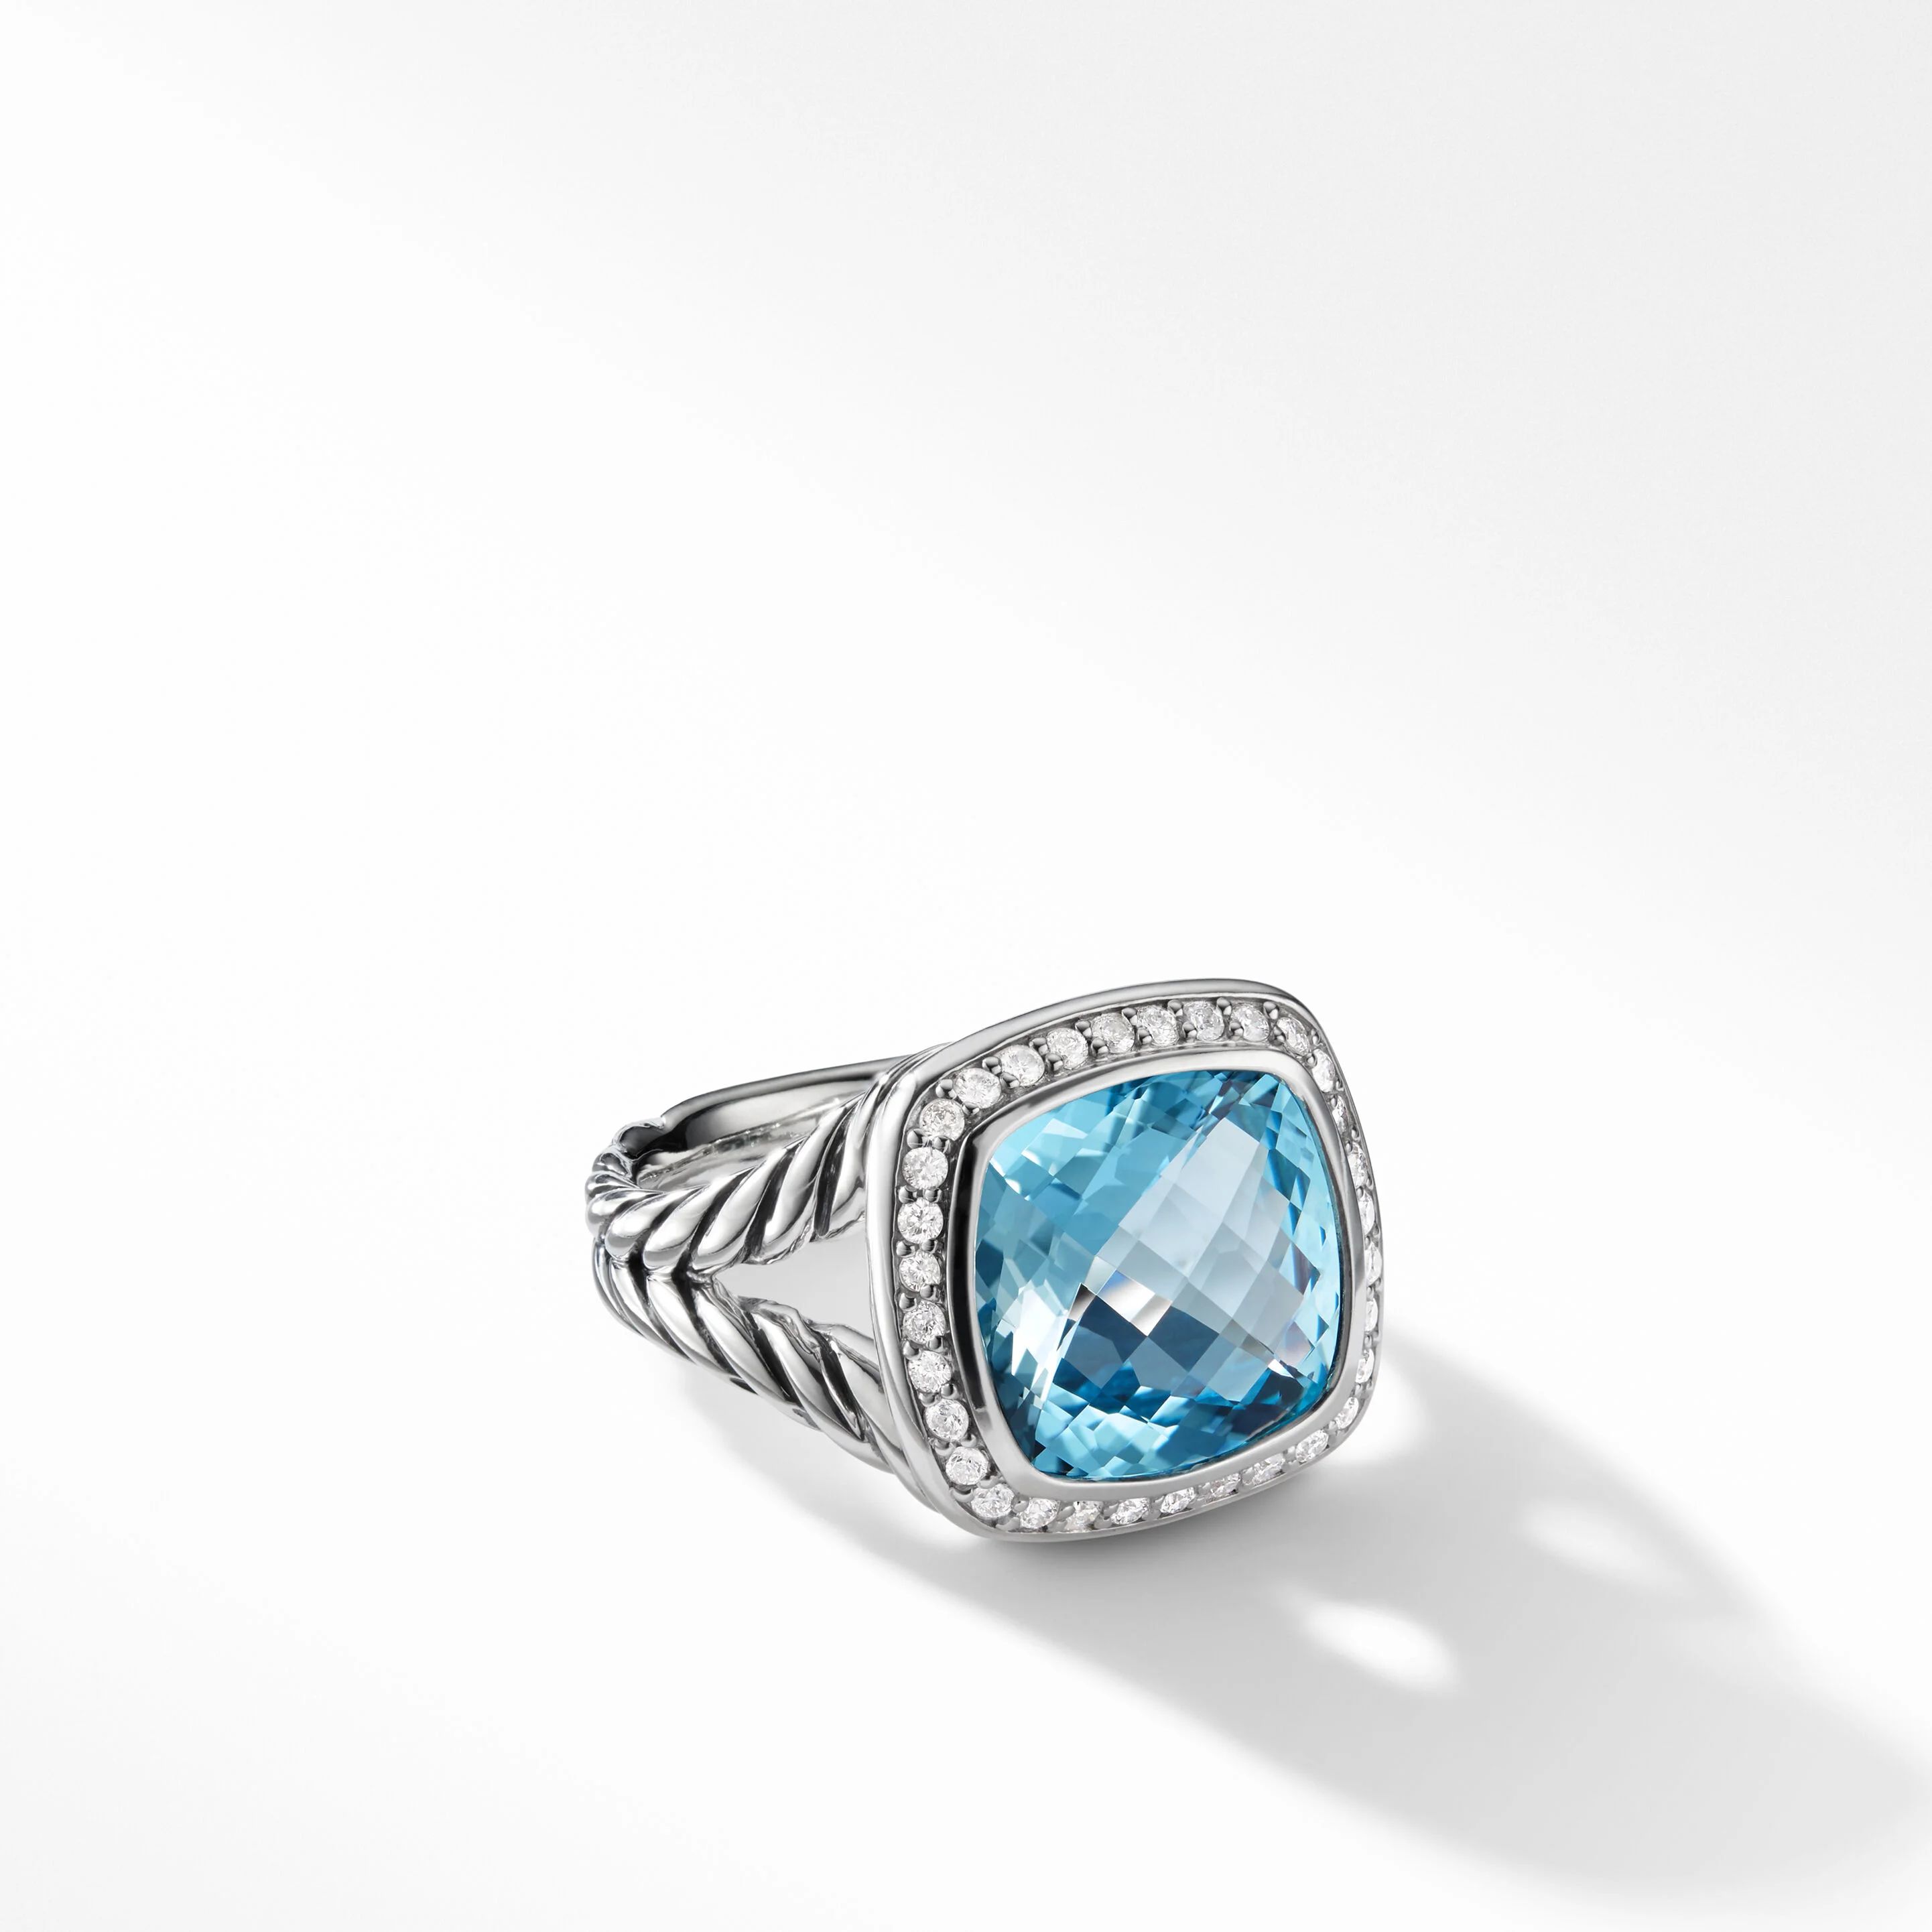 Albion® Ring in Sterling Silver with Blue Topaz and Pavé Diamonds | David Yurman